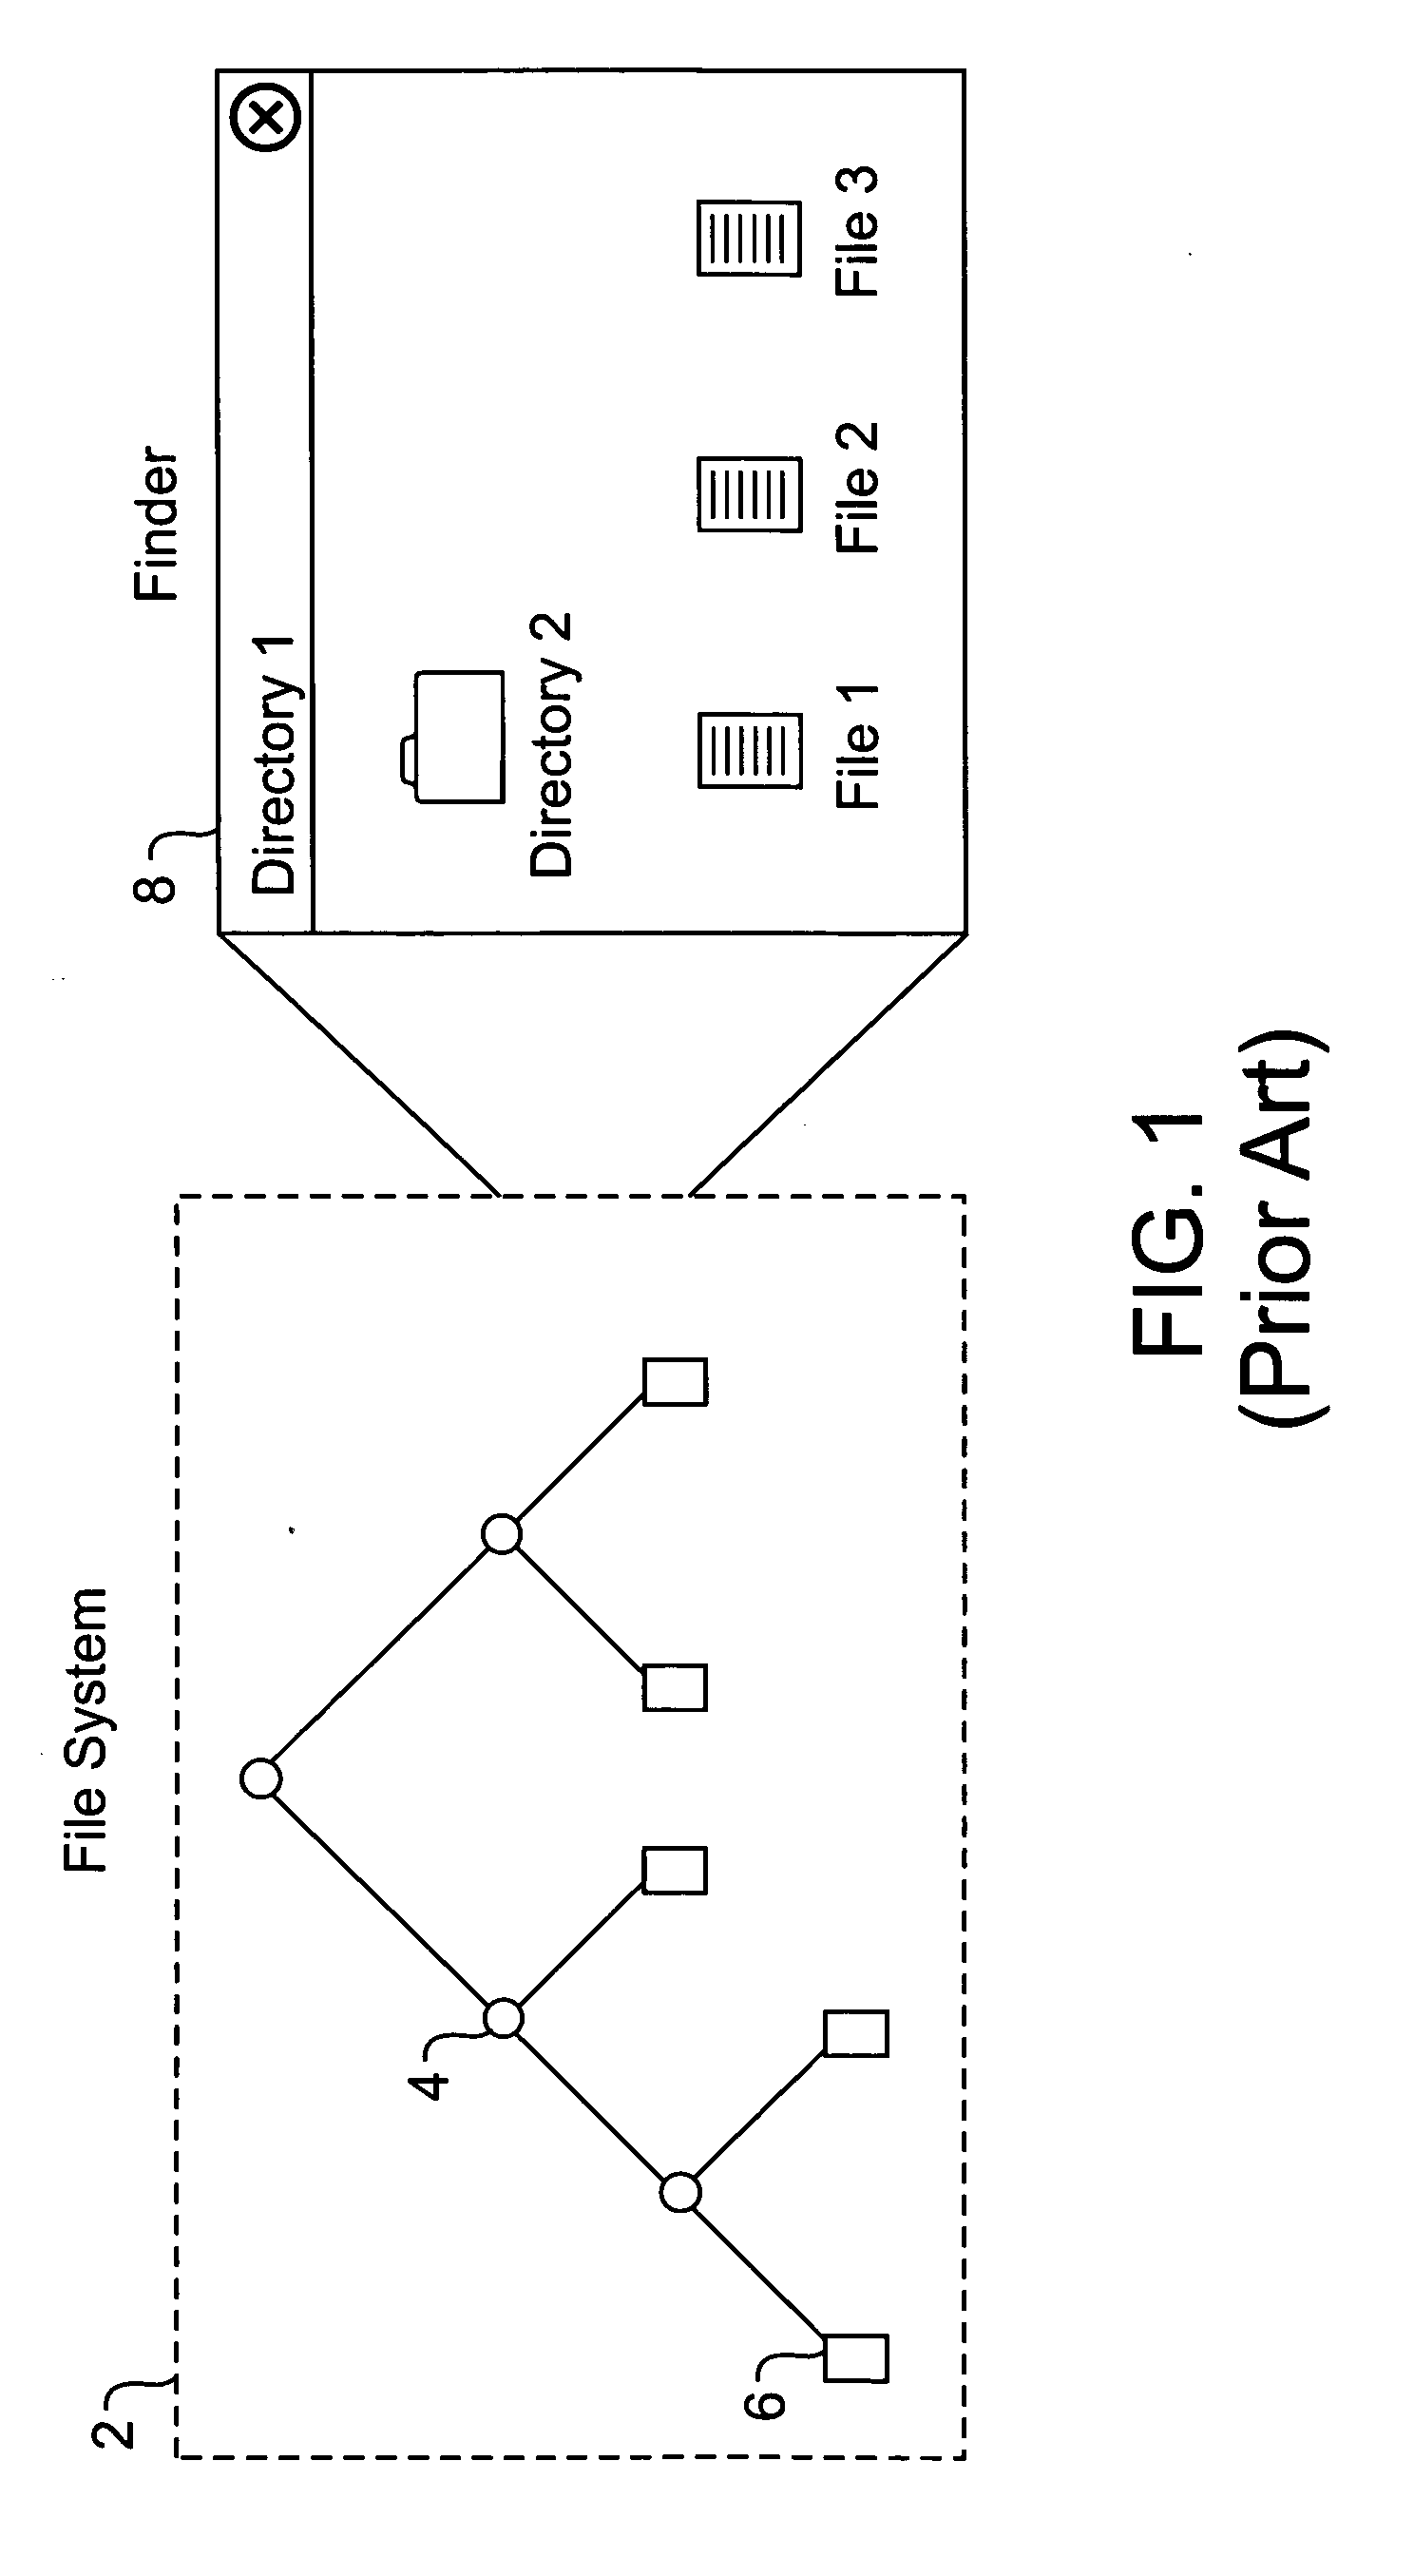 Adaptive service for handling notifications and synchronizing directories of a file system